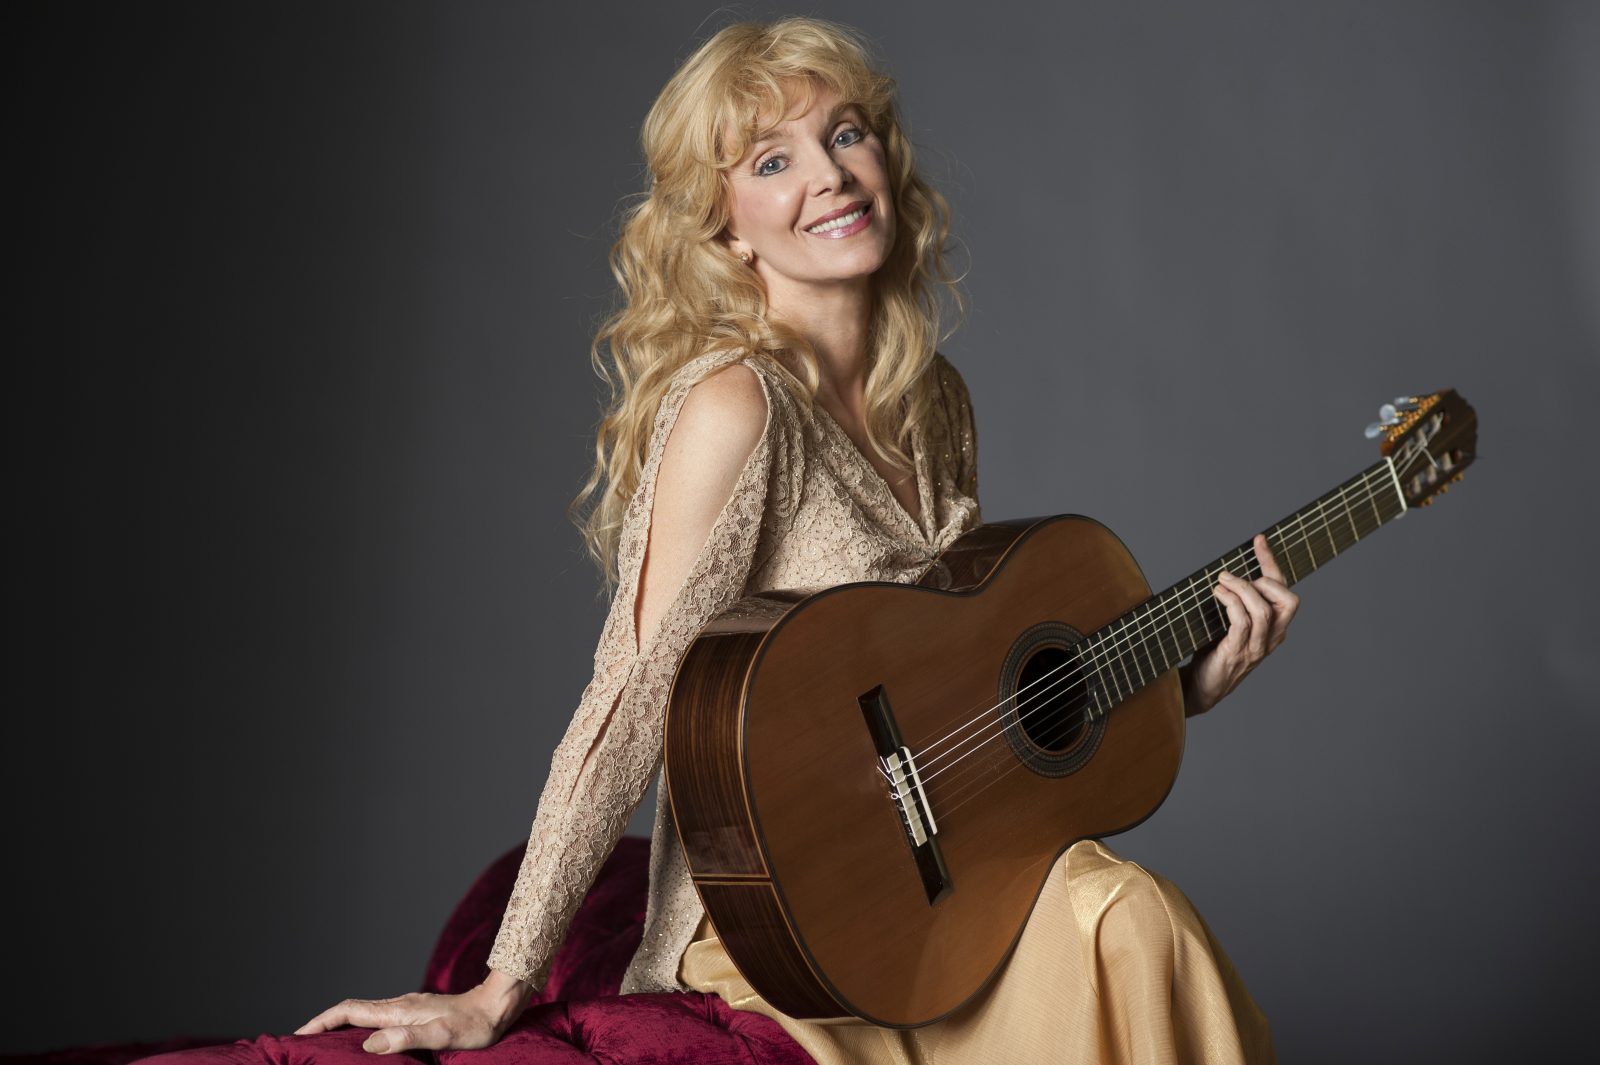 First Lady of Classical Guitar coming to Cornwall